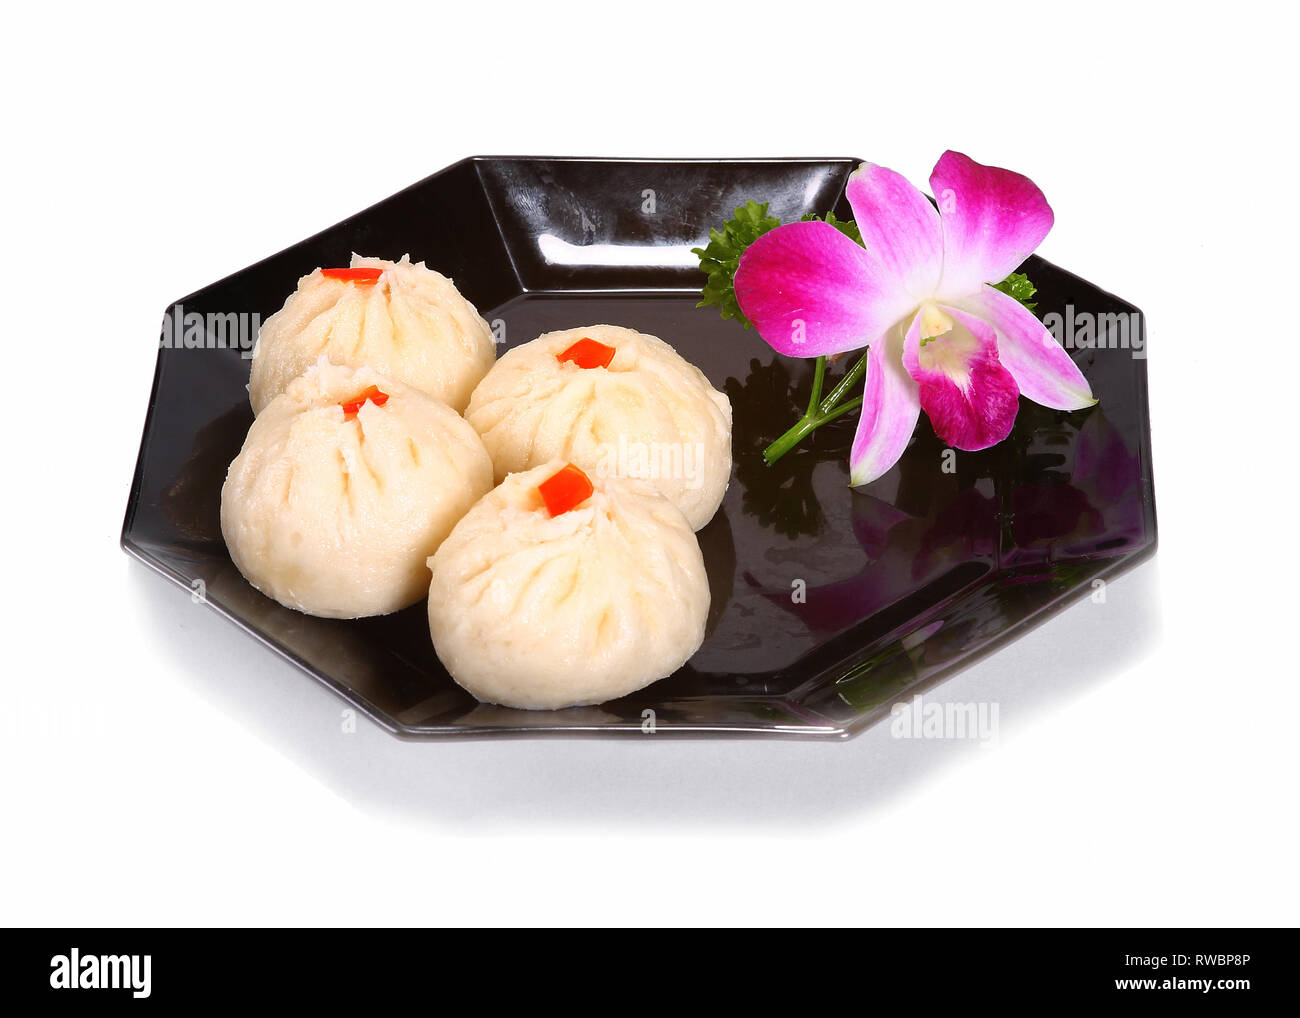 Chinese / Asian desserts served on a black plate. Stock Photo